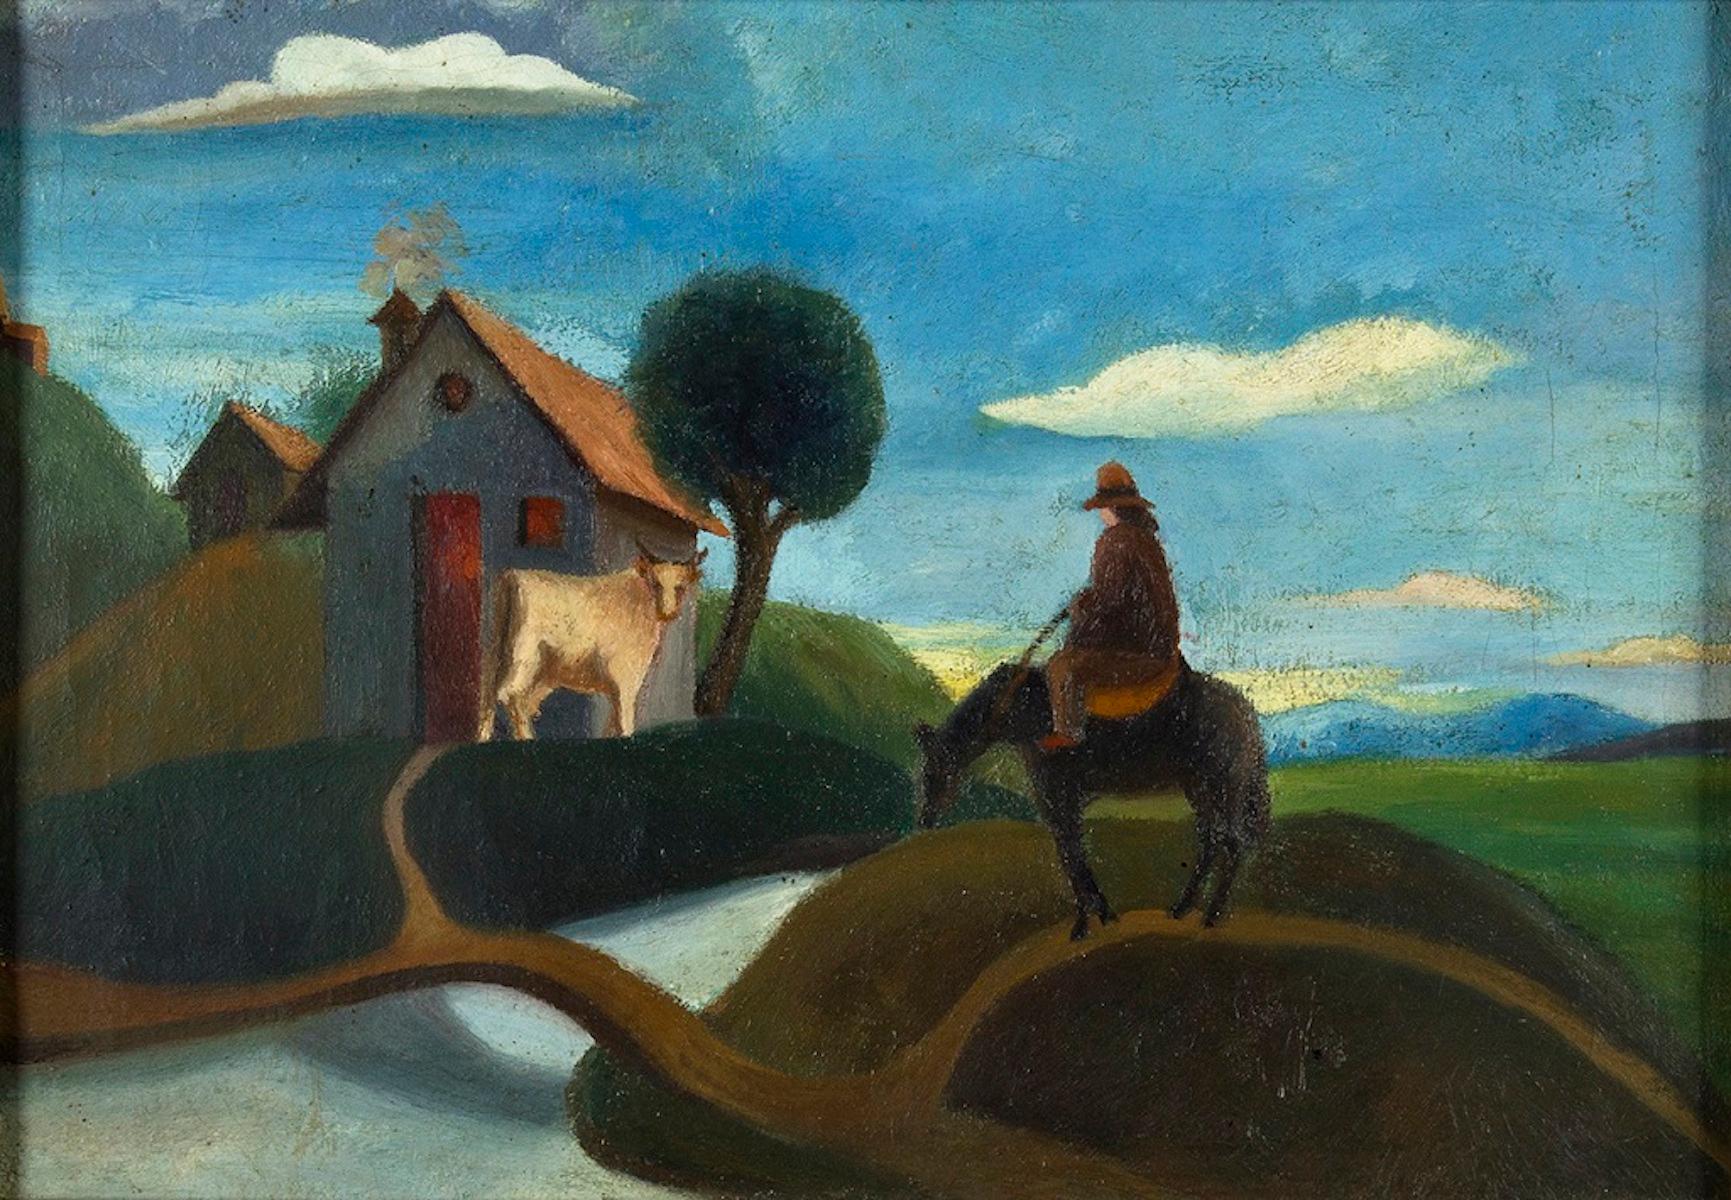 Unknown Figurative Painting - Landscape with Farmer - Oil on Canvas - Early 20th Century